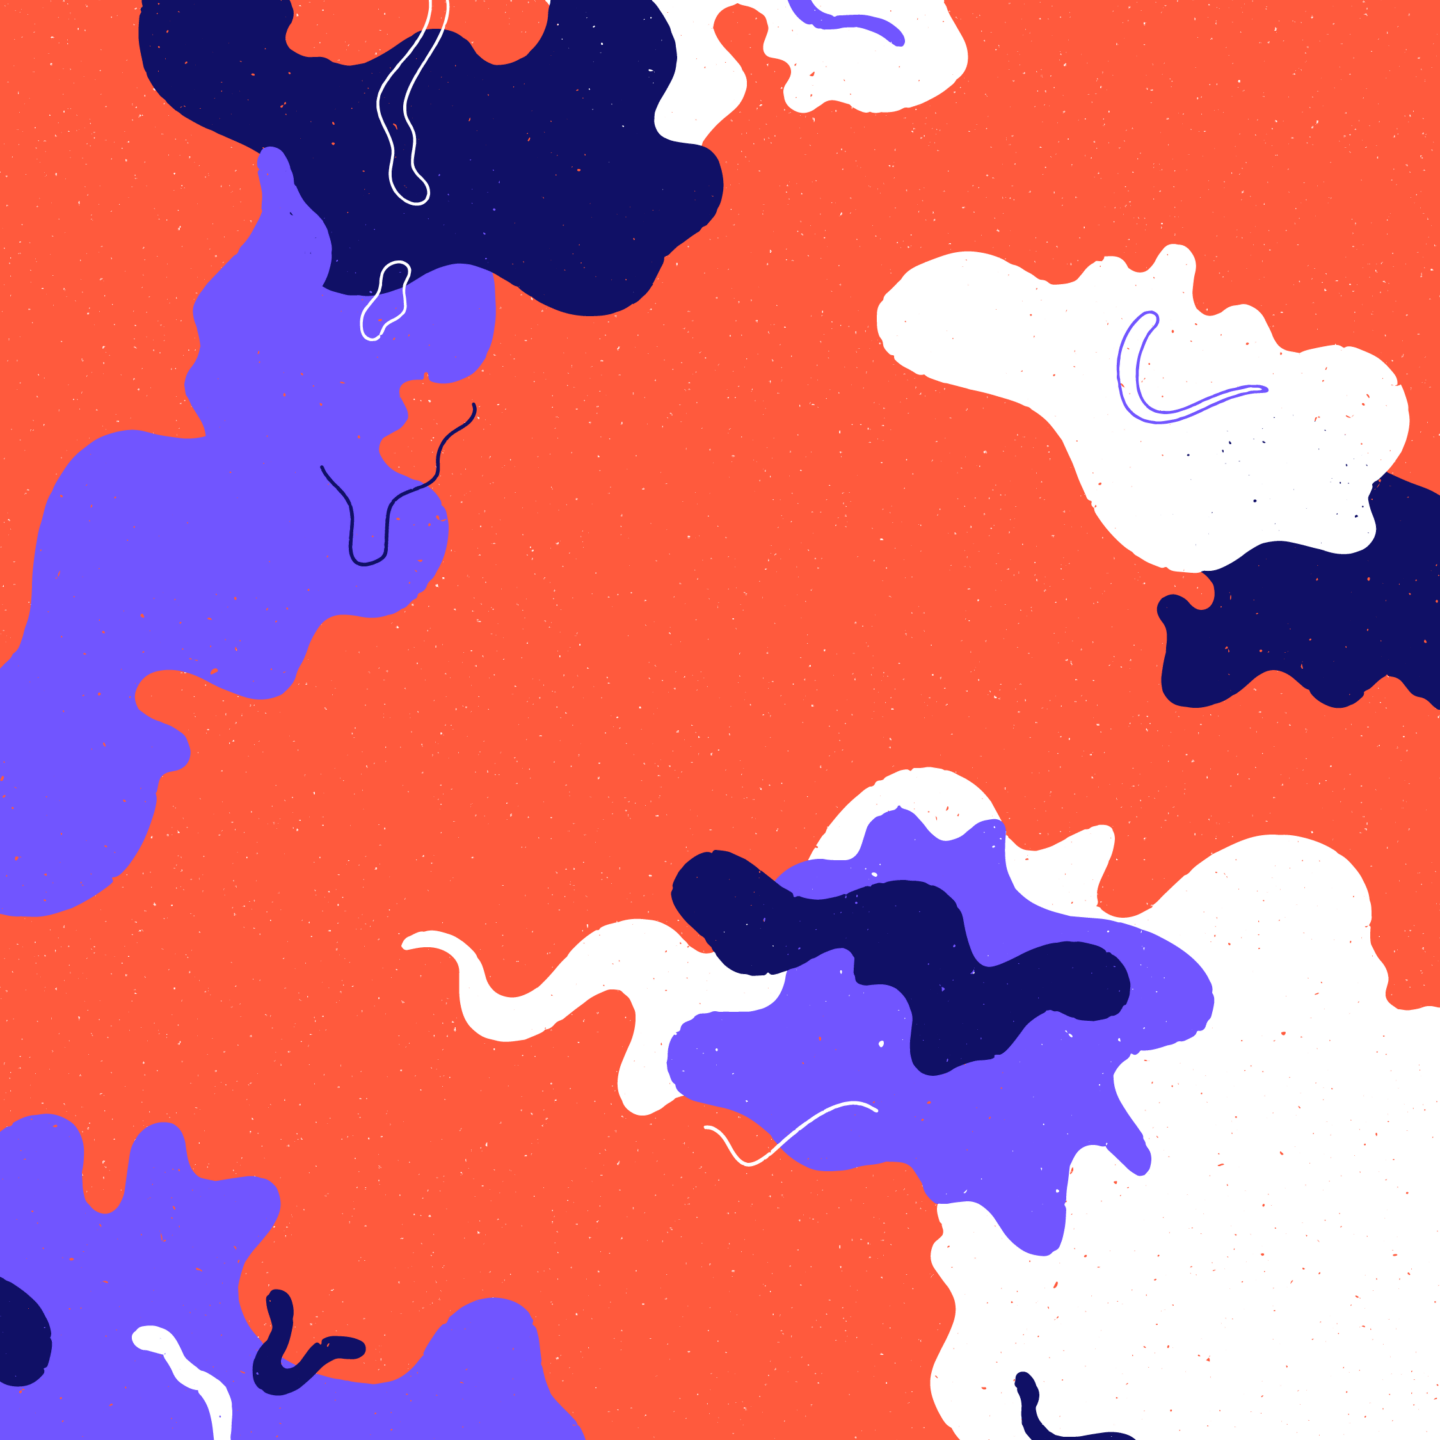 orange, violet, purple and white squigleys and blobs